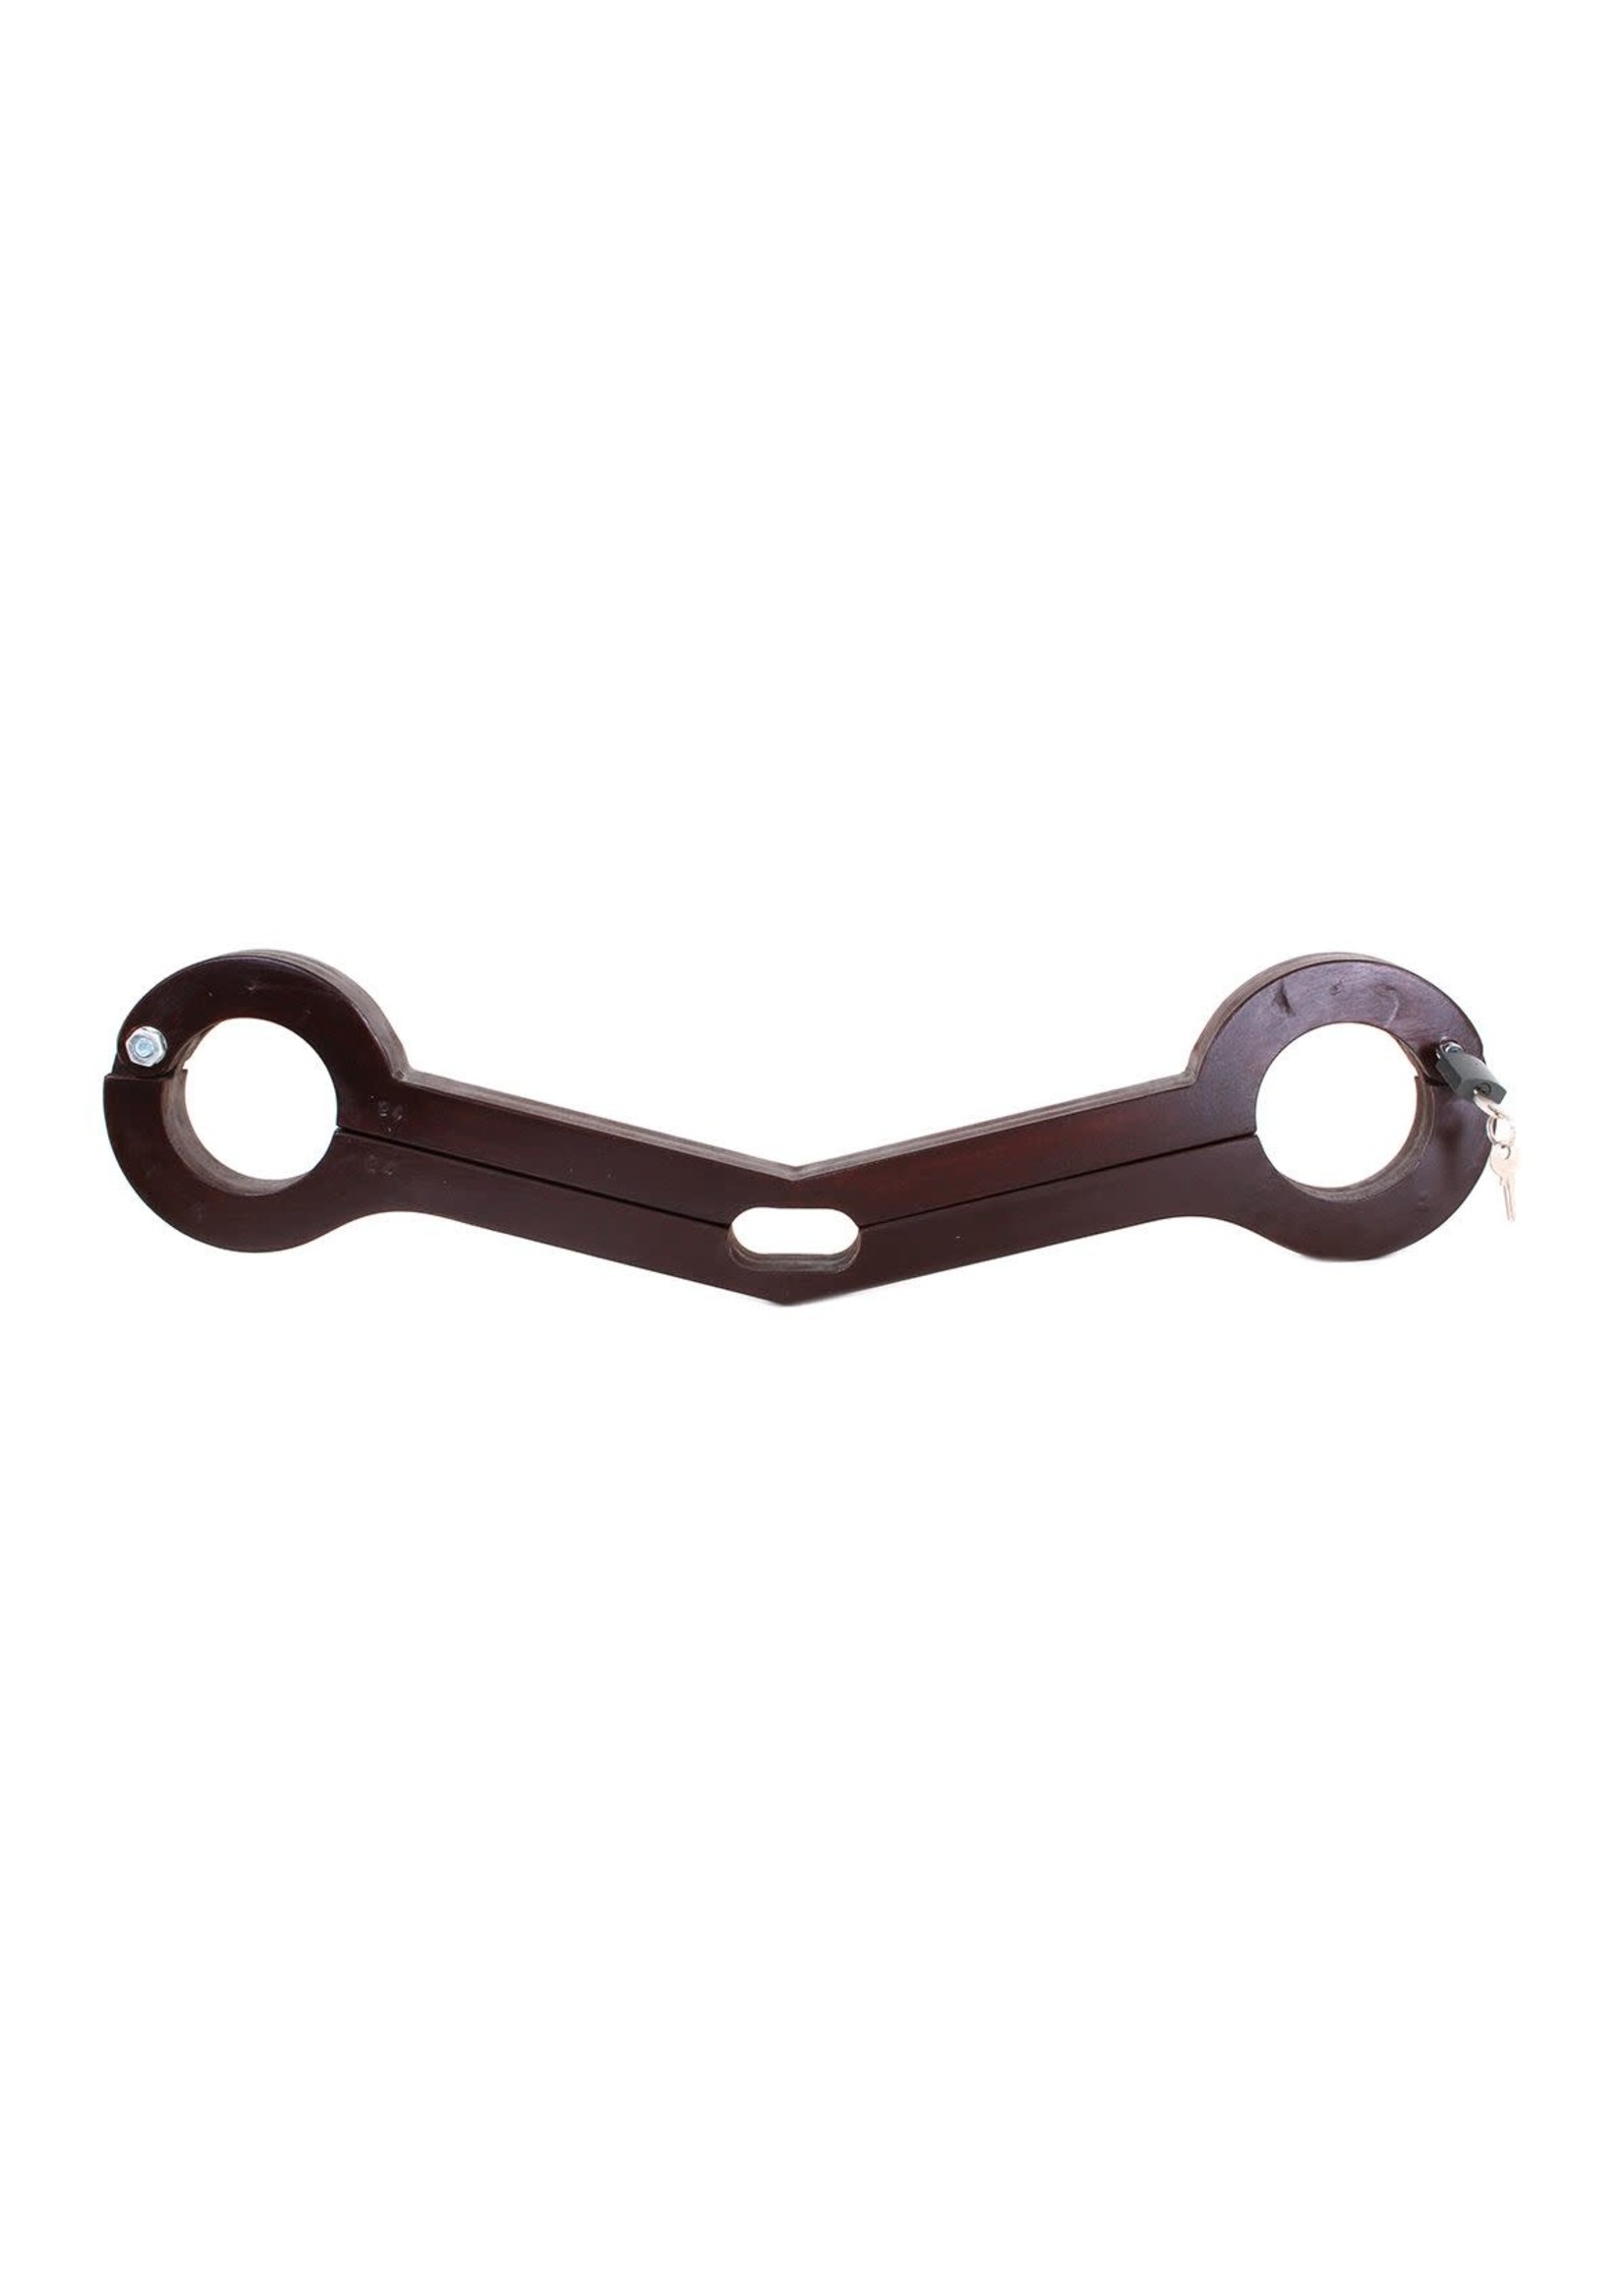 O-Products Wooden humbler with wrist cuffs